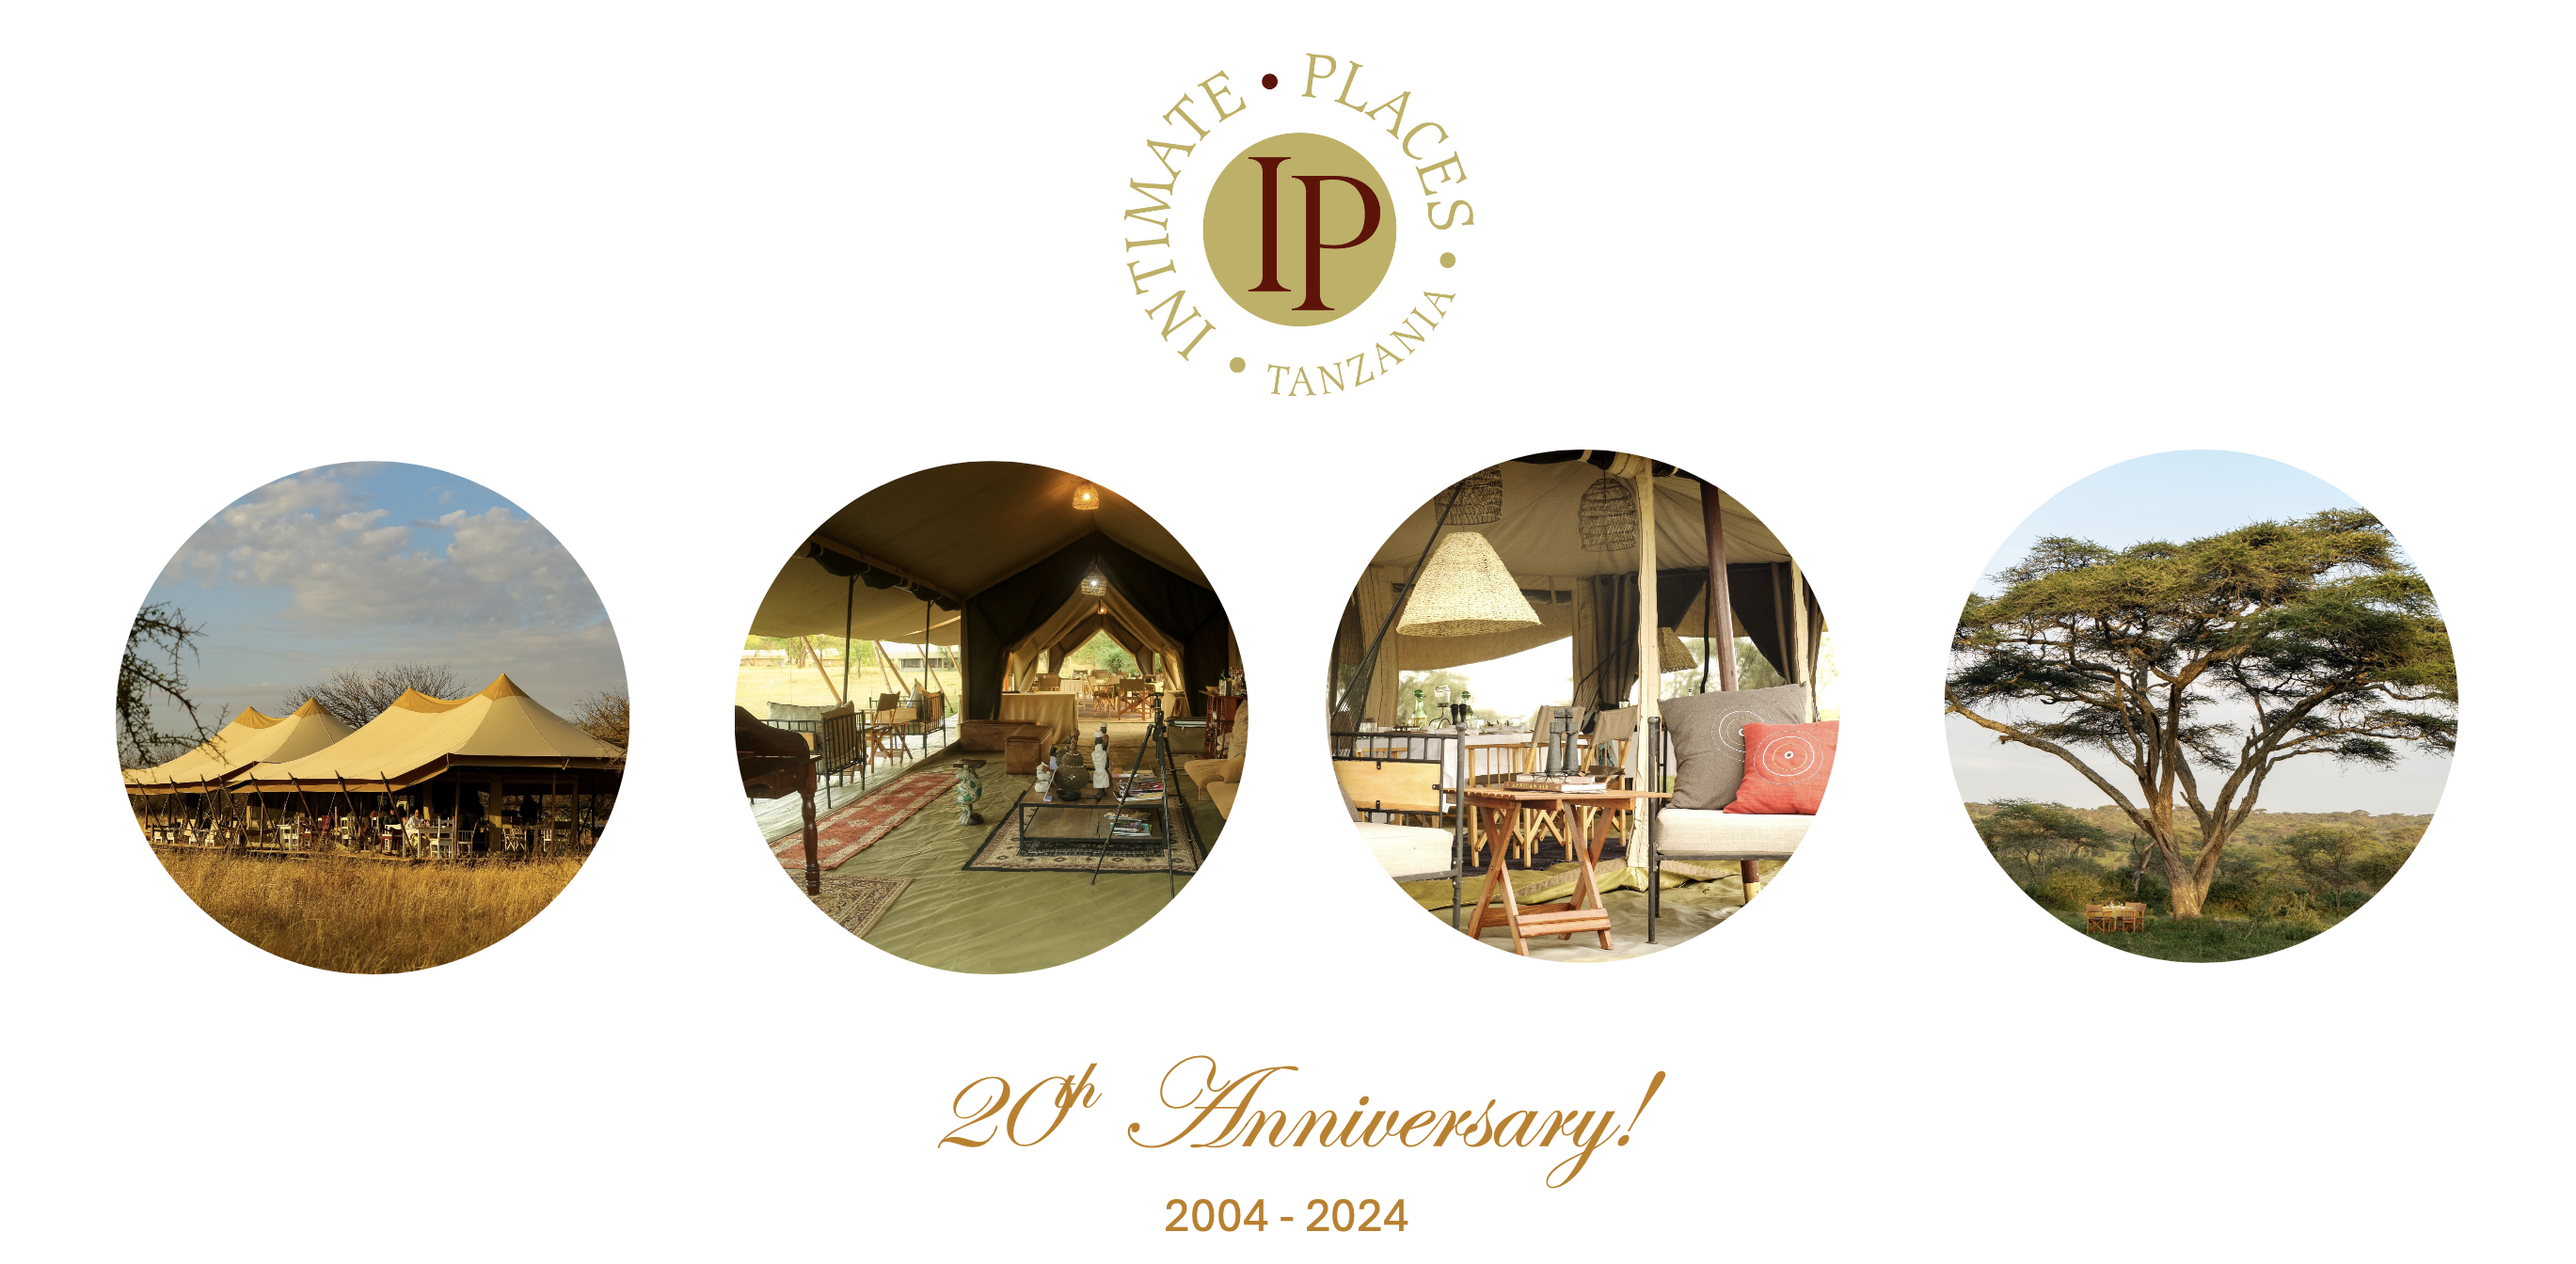 Intimate Places Webinar Picture - 20th Anniversary!.jpg